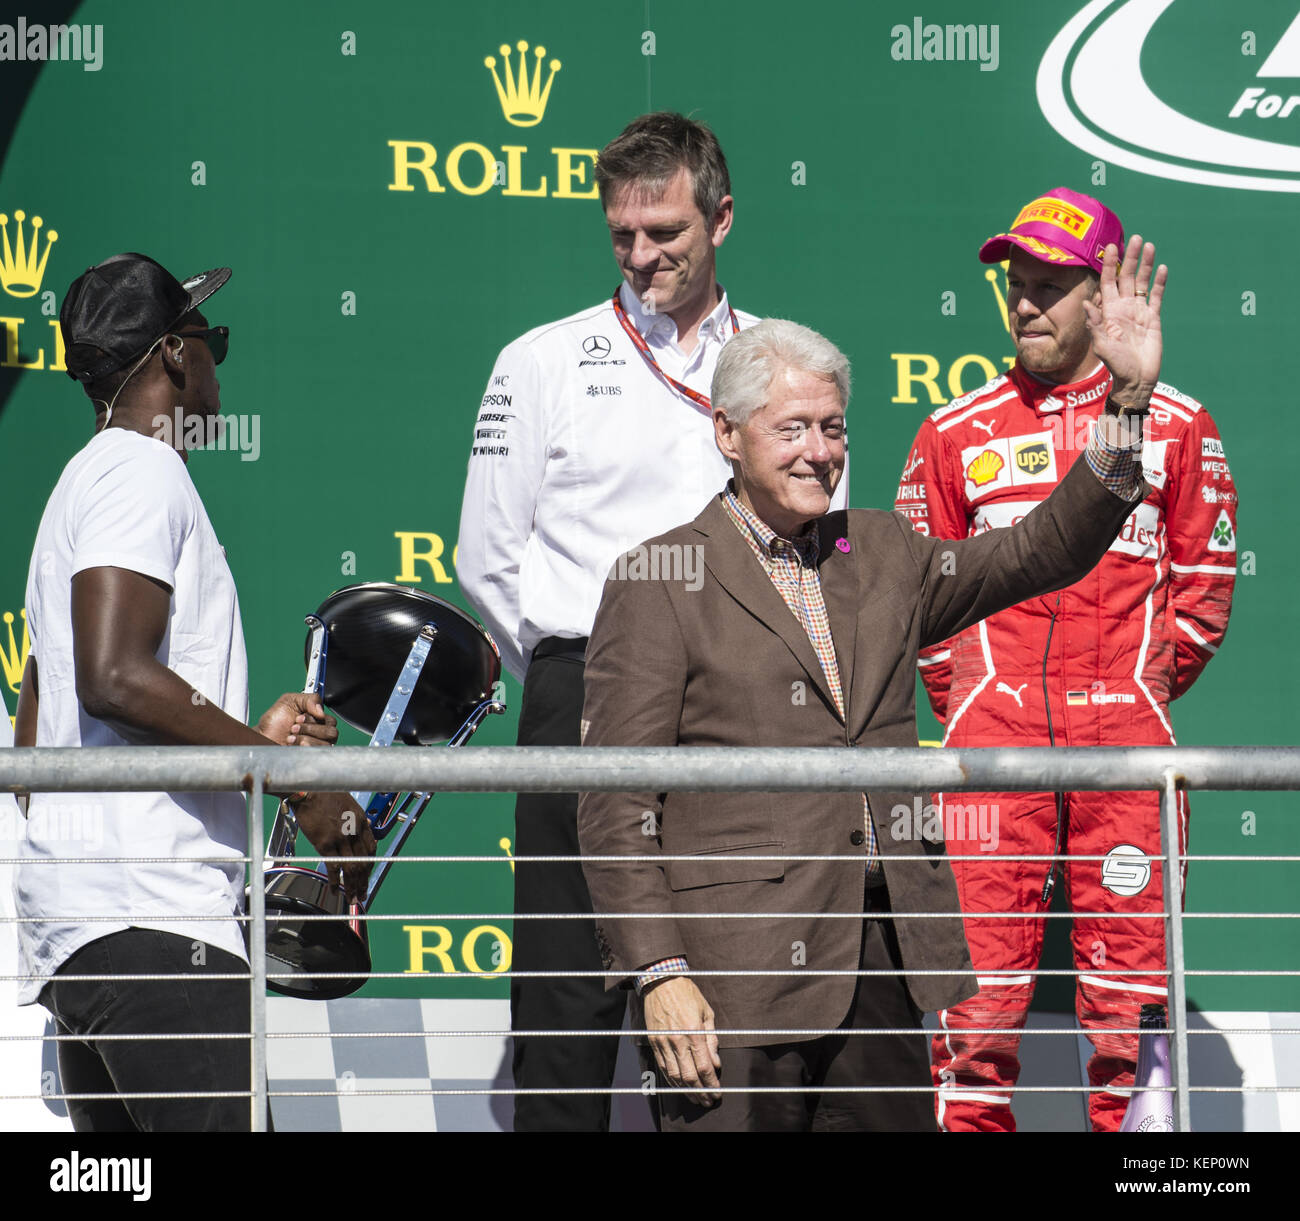 Austin, Texas, USA. 22nd Oct, 2017. Former 42nd President of the United States '' BILL CLINTON'' presenting the trophy to the winner #44 LEWIS HAMILTON driver for Mercedes AMG Petronas F1 Team. Credit: Hoss Mcbain/ZUMA Wire/Alamy Live News Stock Photo